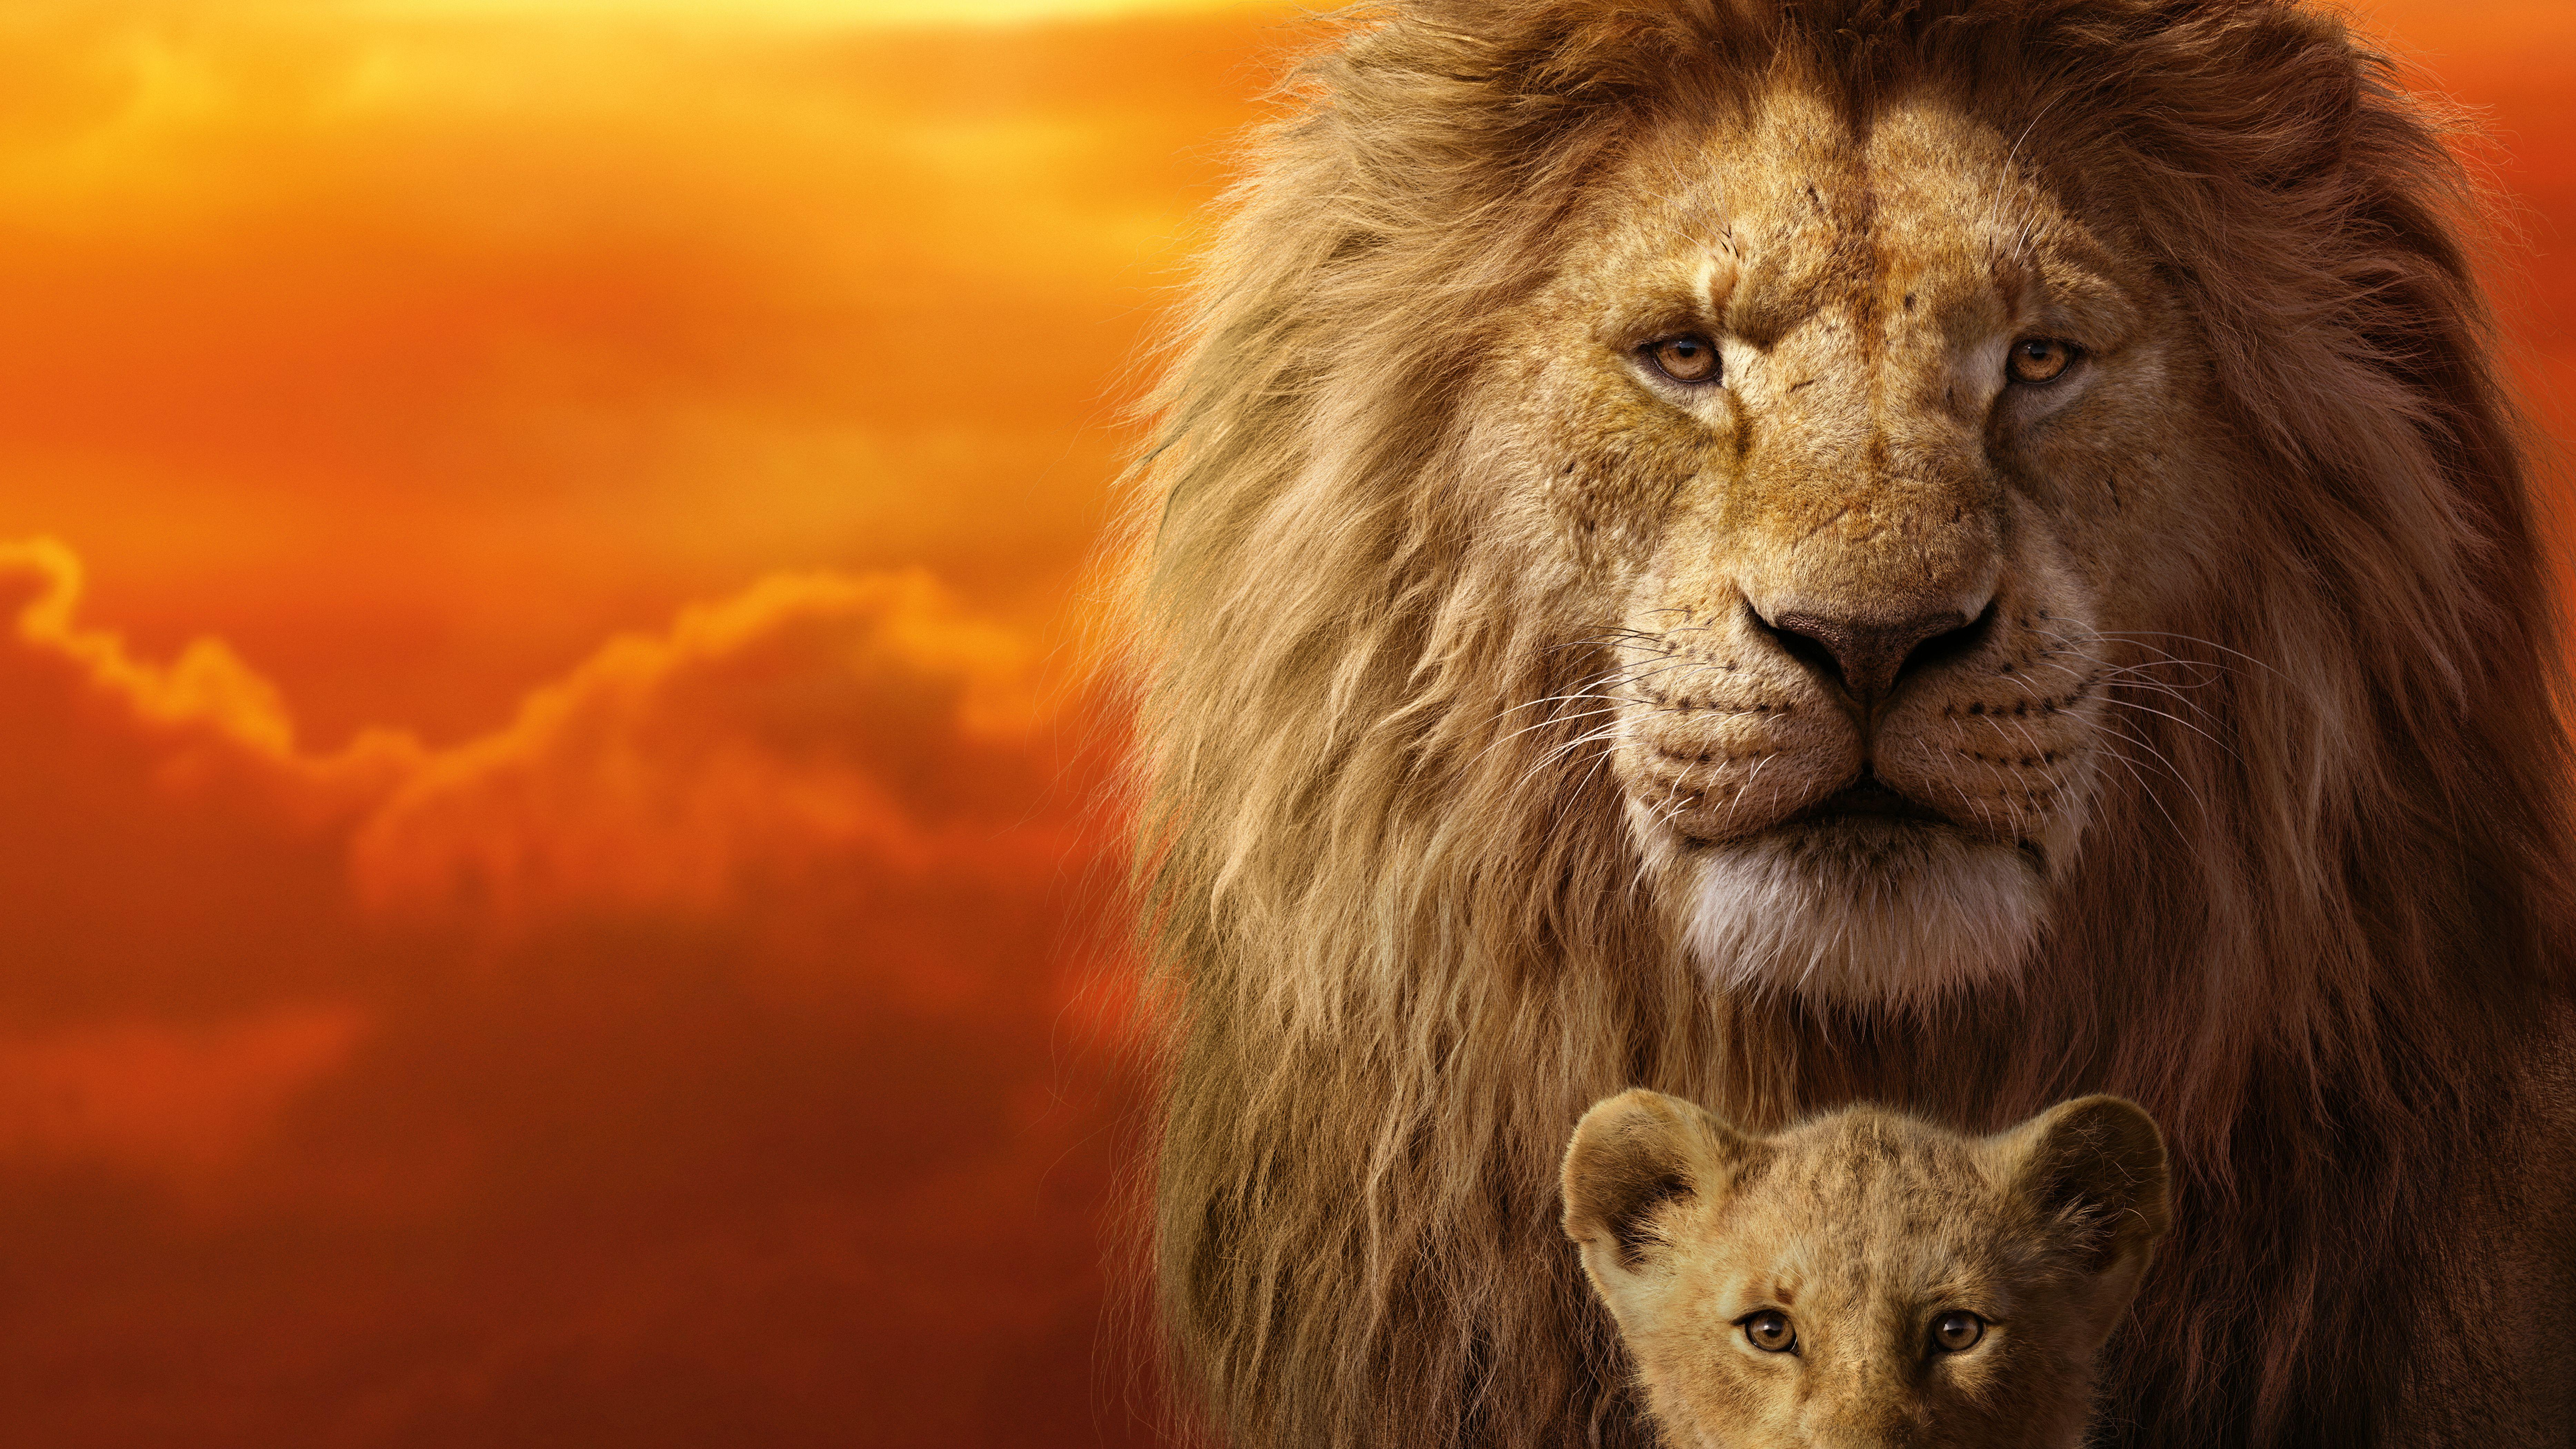 The Lion King 2019 Wallpaper Free The Lion King 2019